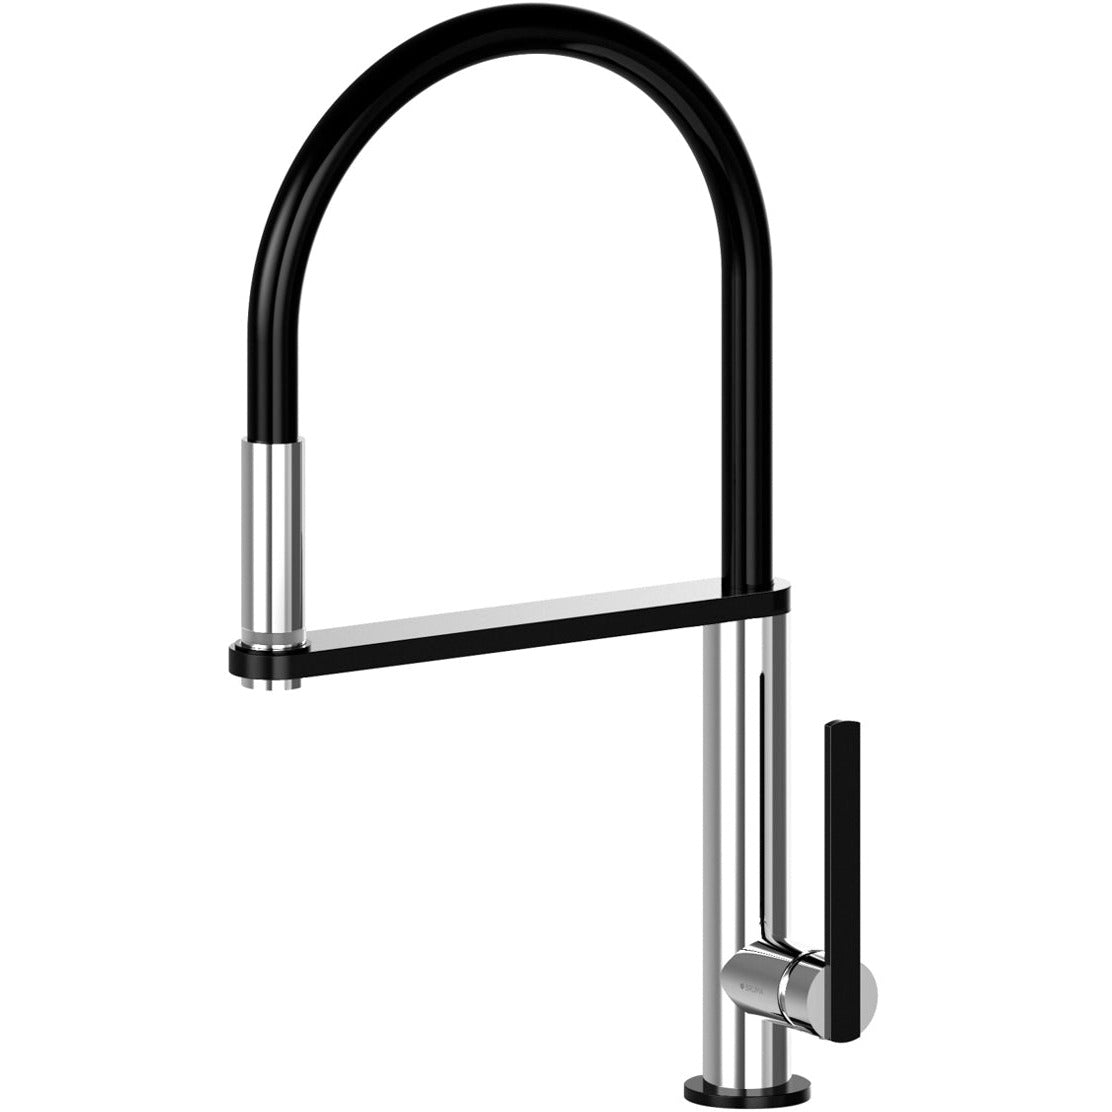 Mentha LED Kitchen Mixer Tap with Swivel Spout & Extendable Spray Head - Letta London - 